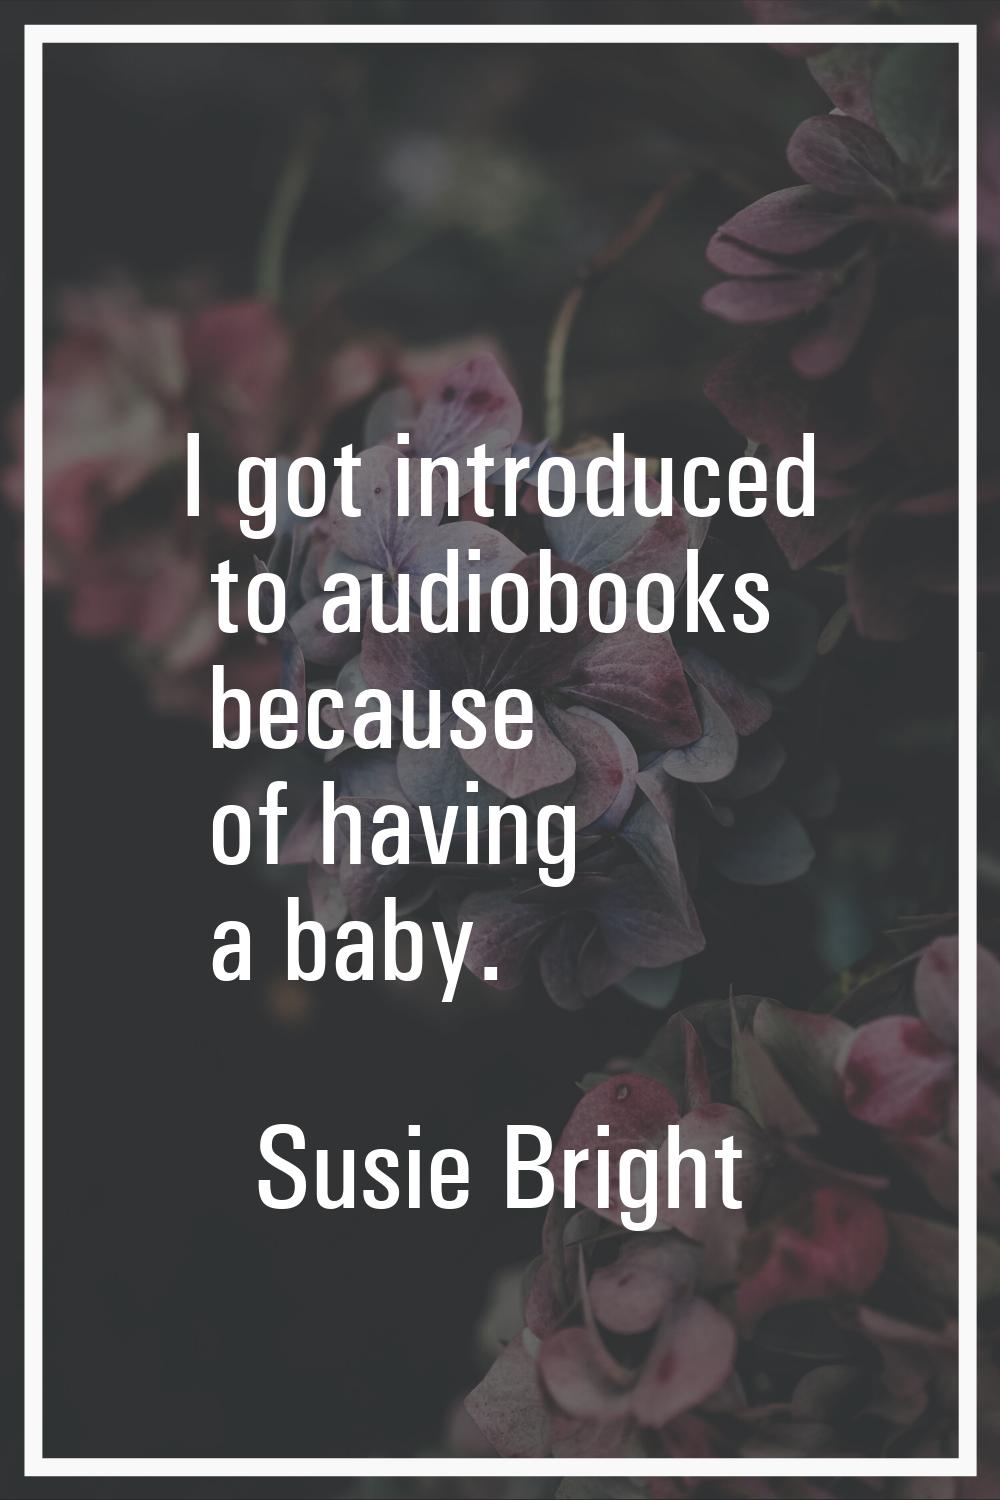 I got introduced to audiobooks because of having a baby.